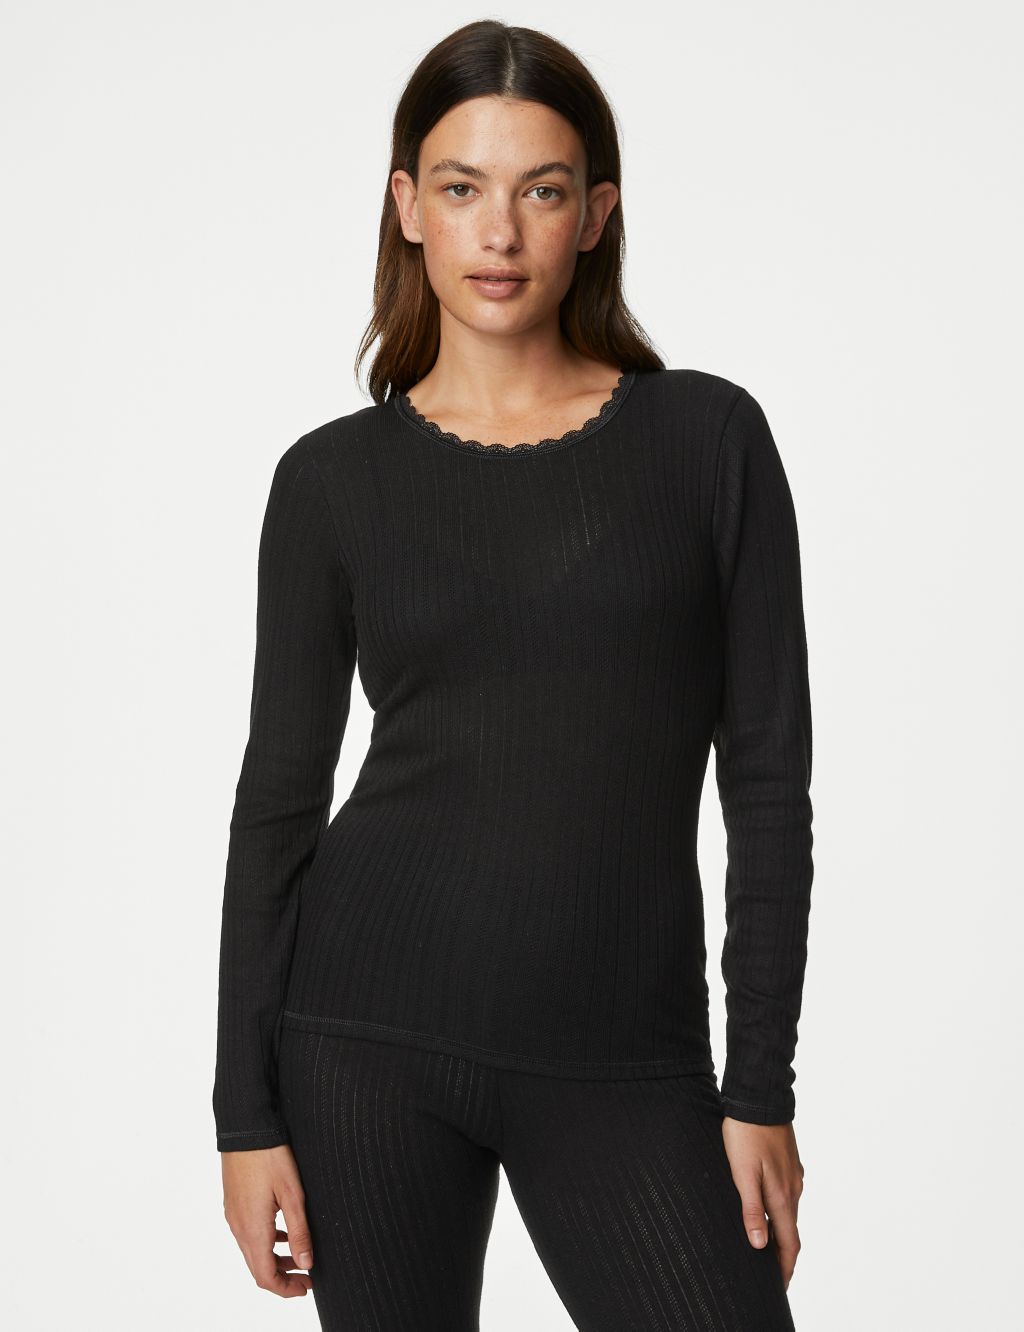 Thermals for Women | Women's Base Layers | M&S